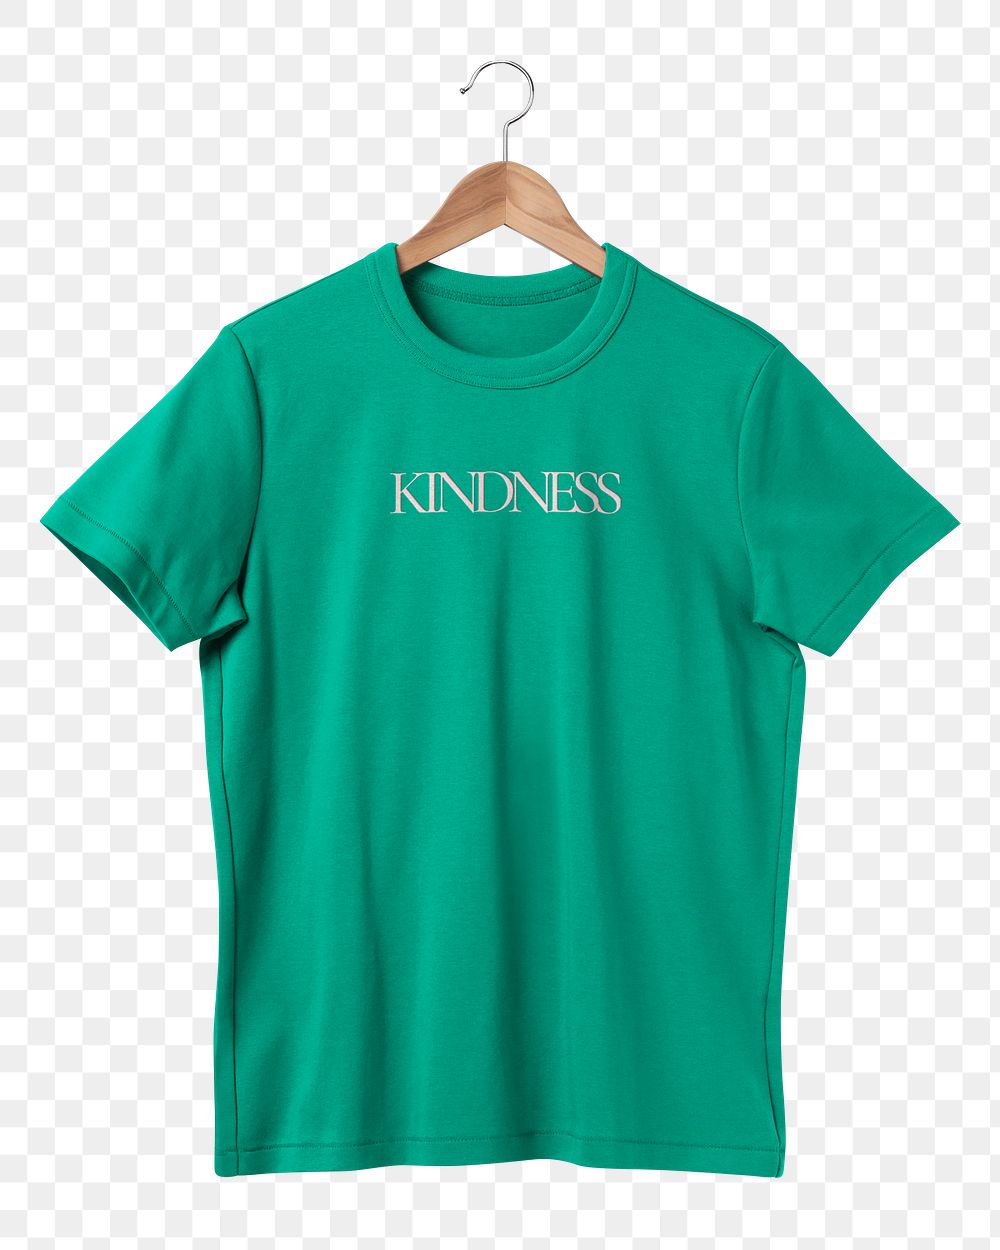 T-shirt png, green simple fashion with printed kindness word transparent background 